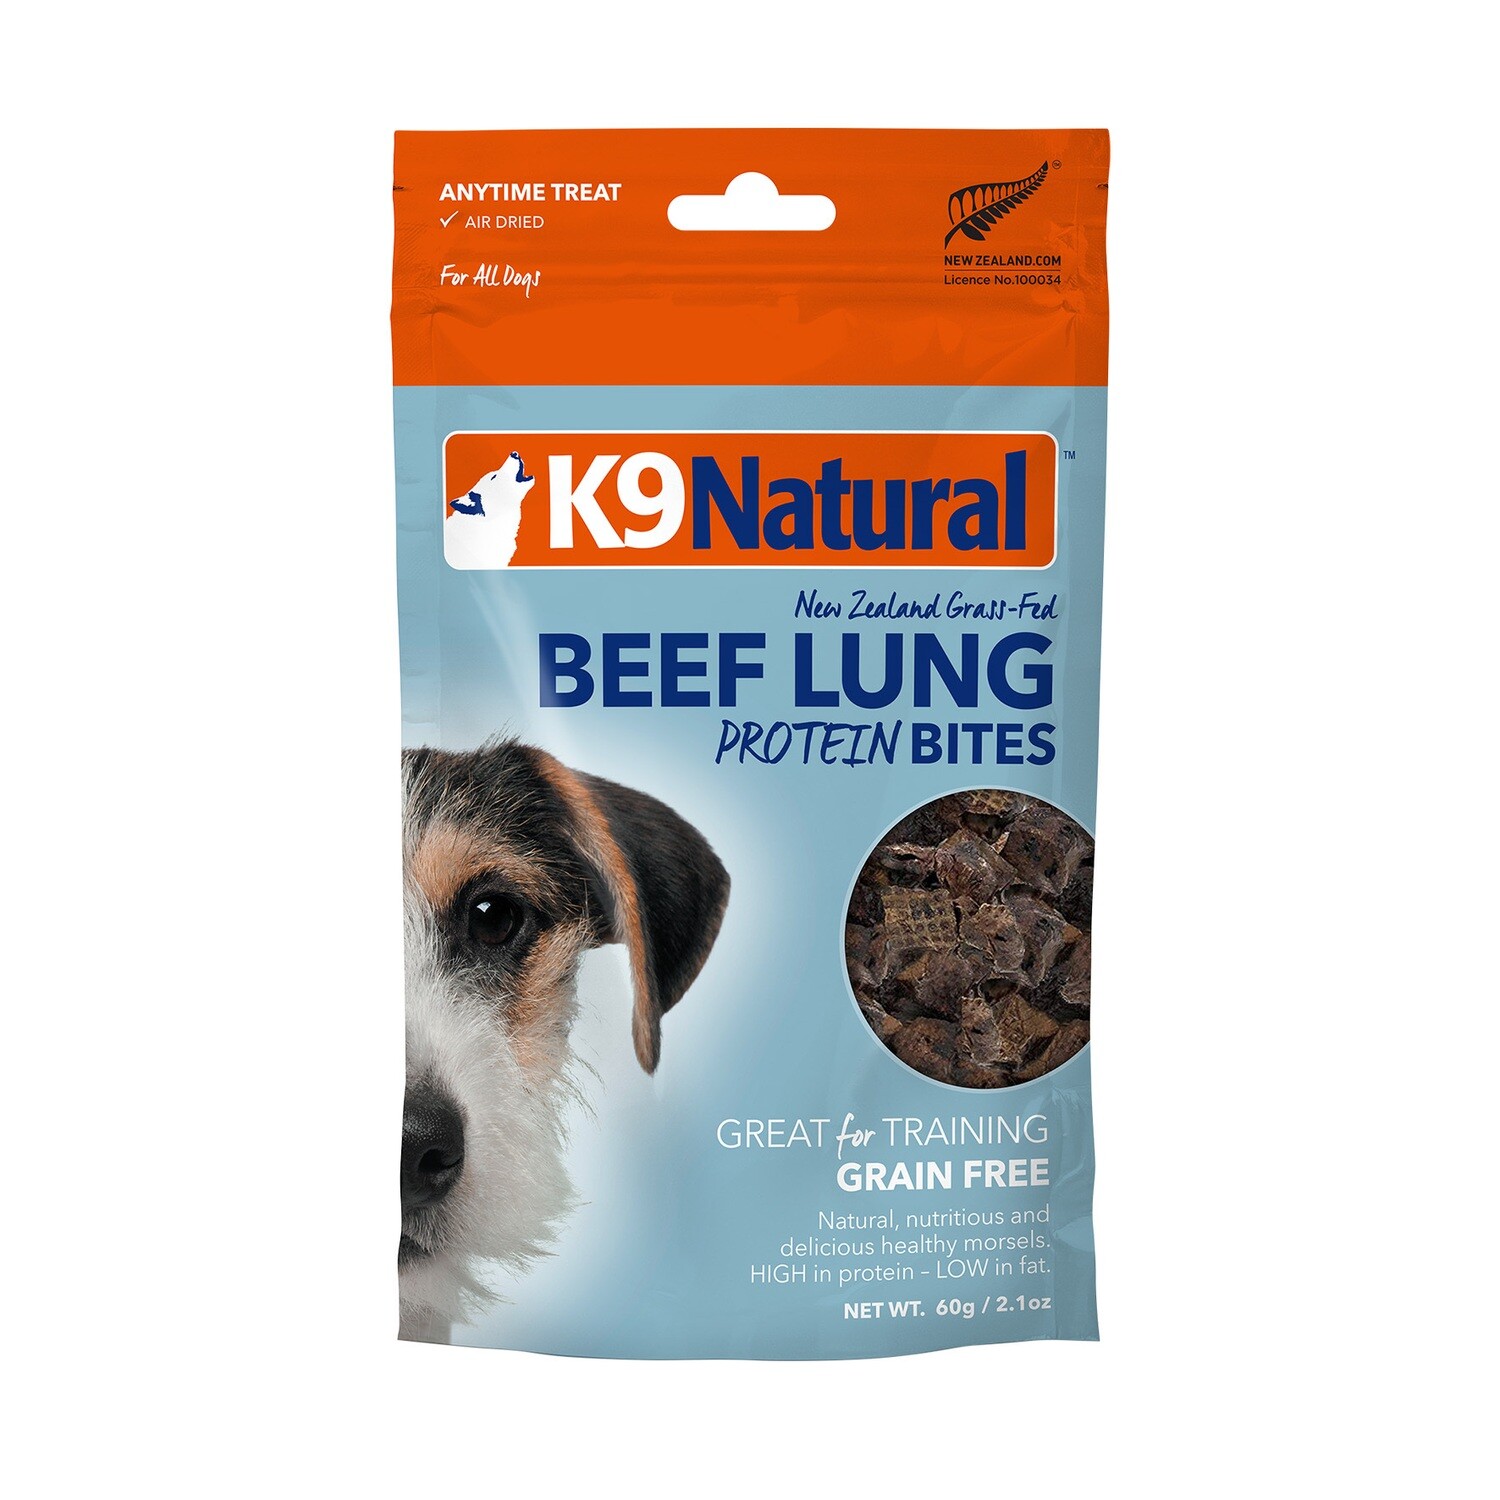 K9 Natural Beef Lung Protein Bites Dog Treat